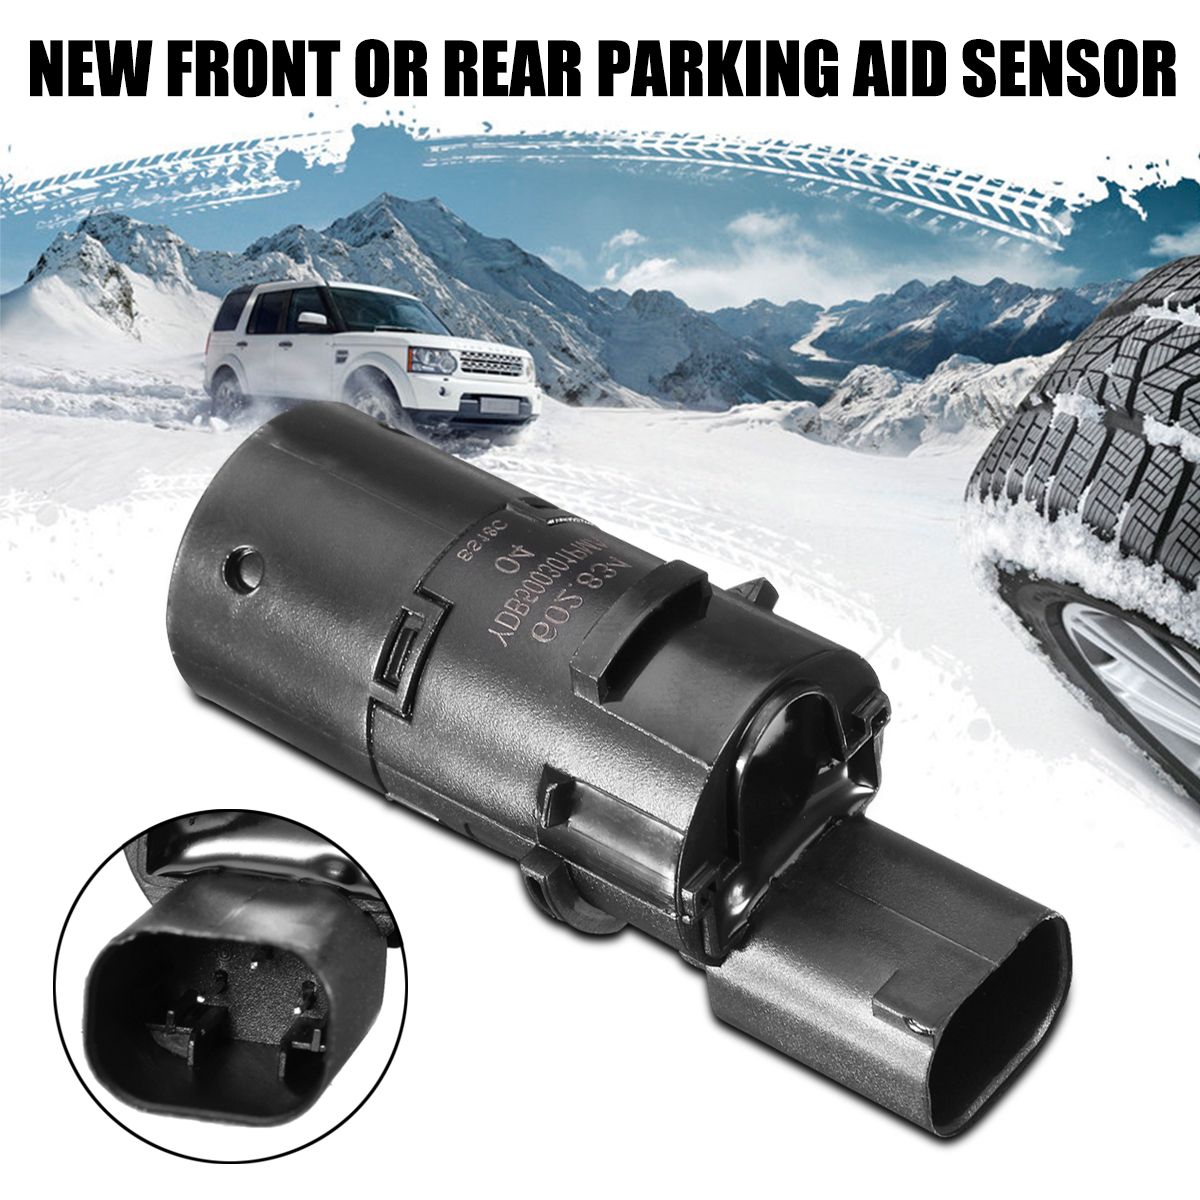 Front-Rear-Parking-Aid-Sensor-For-Land-Rover-L322-02-12-YDB500301PMA-1680522